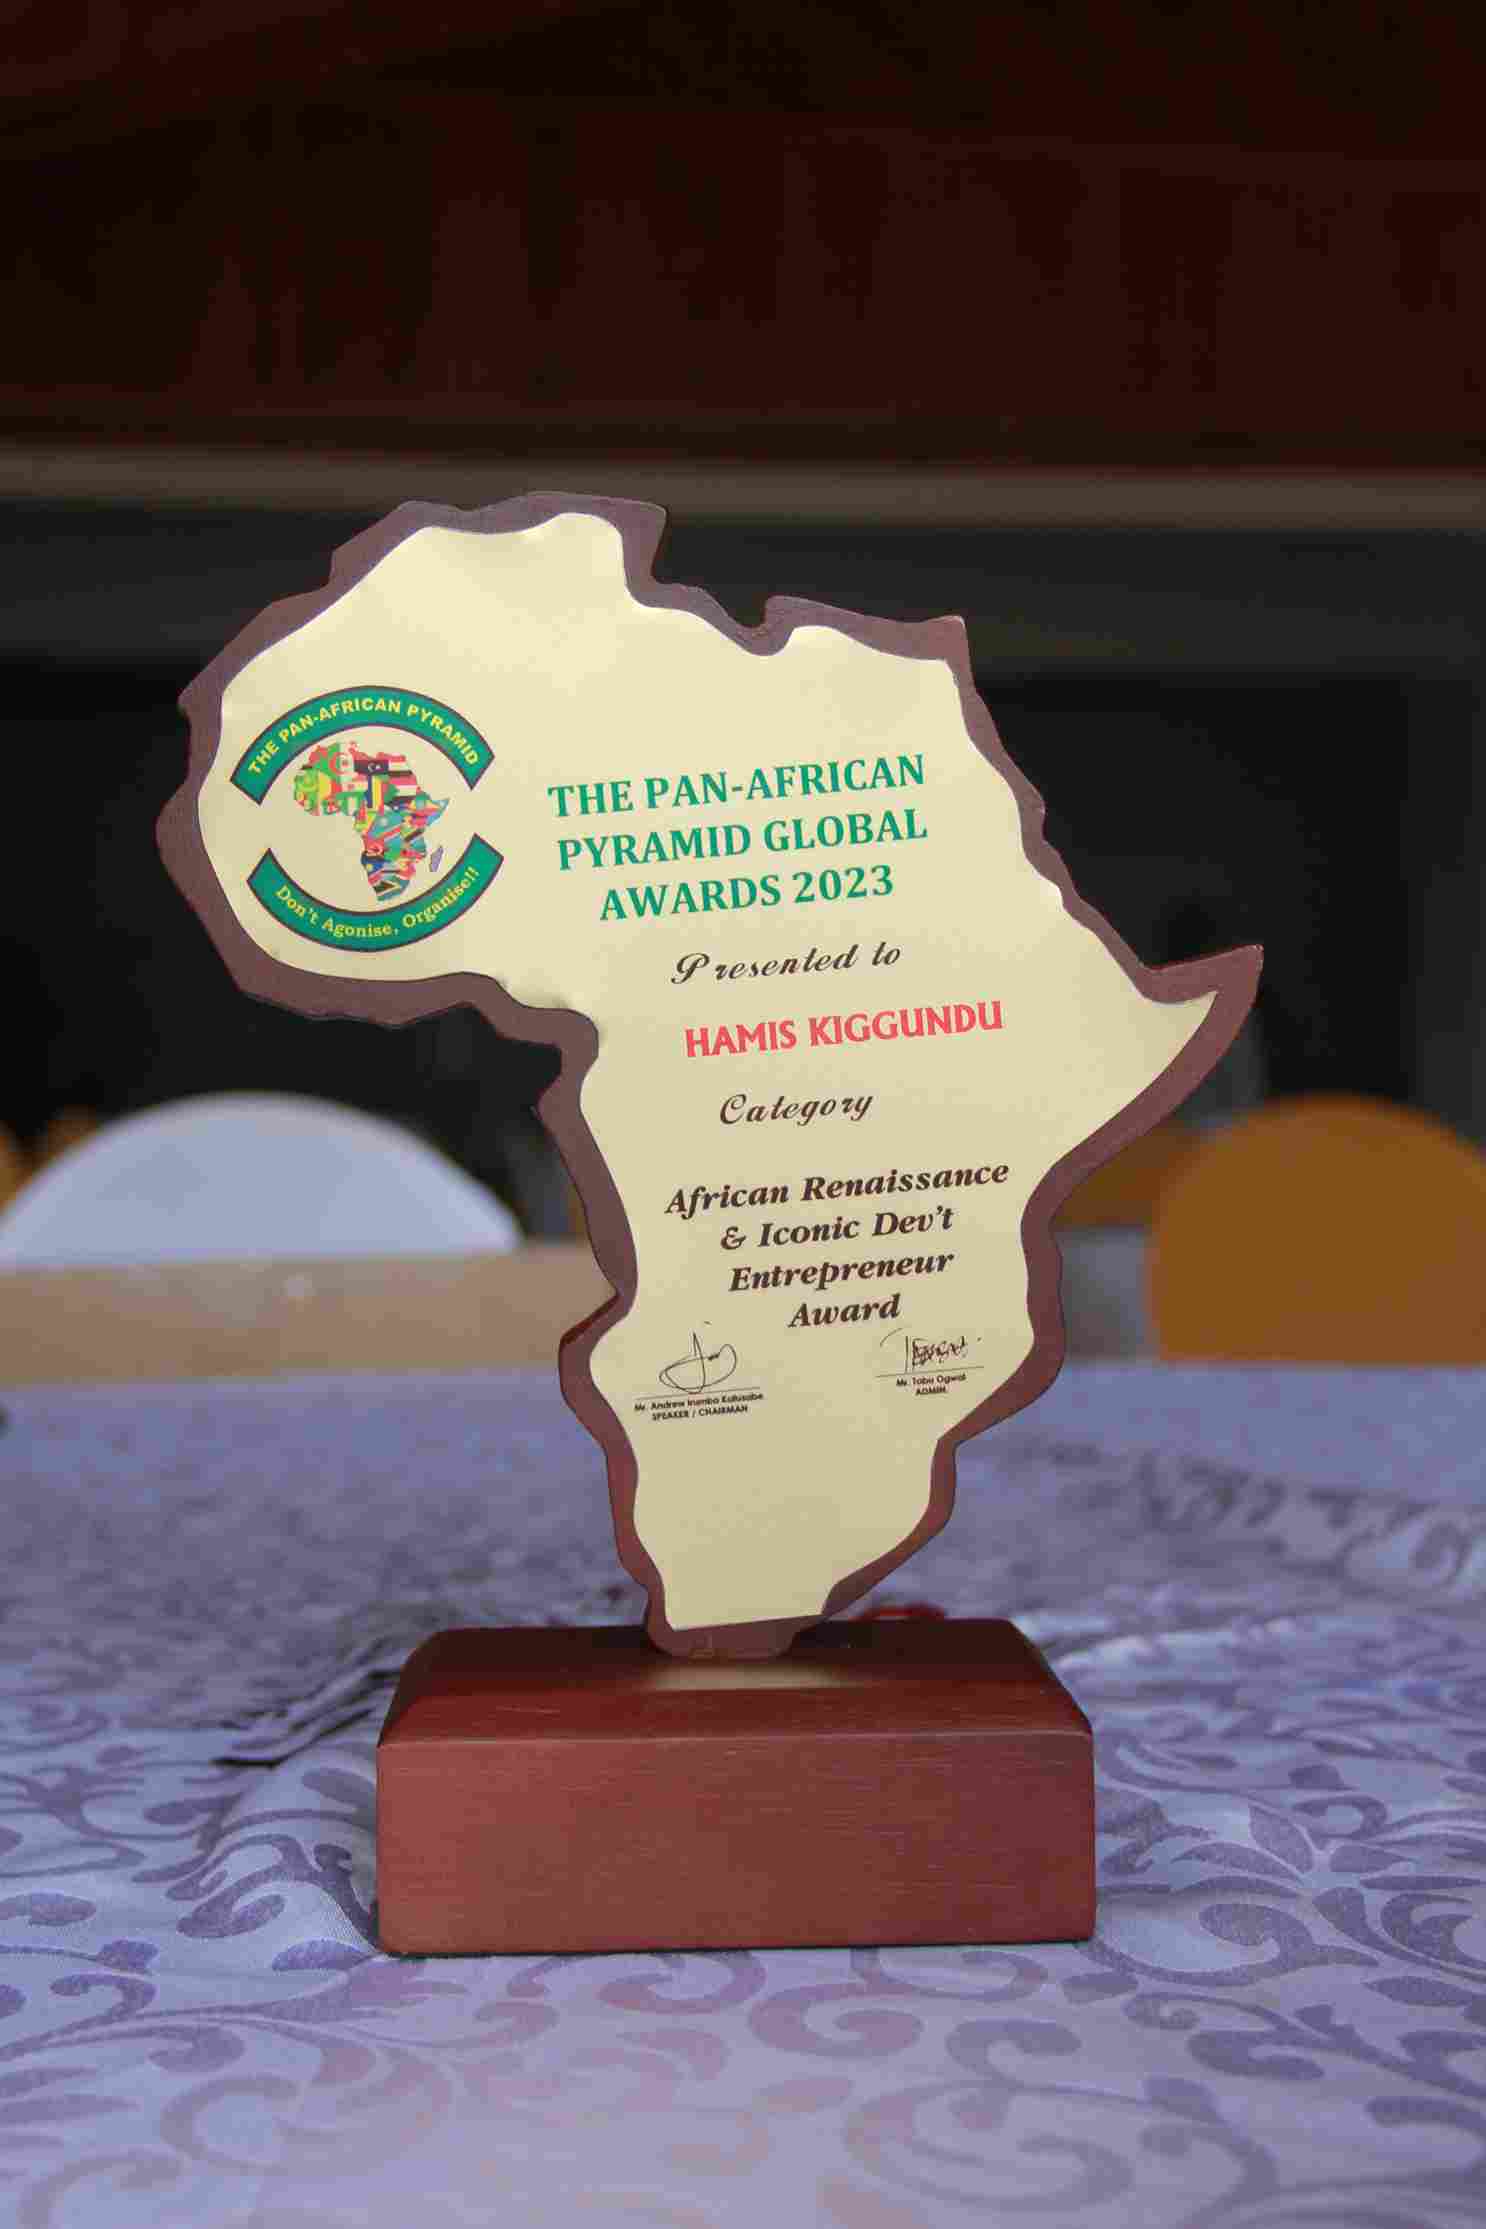 PAP Global Awards 2023: Here Is Why Hamis Kiggundu Was Recognized!